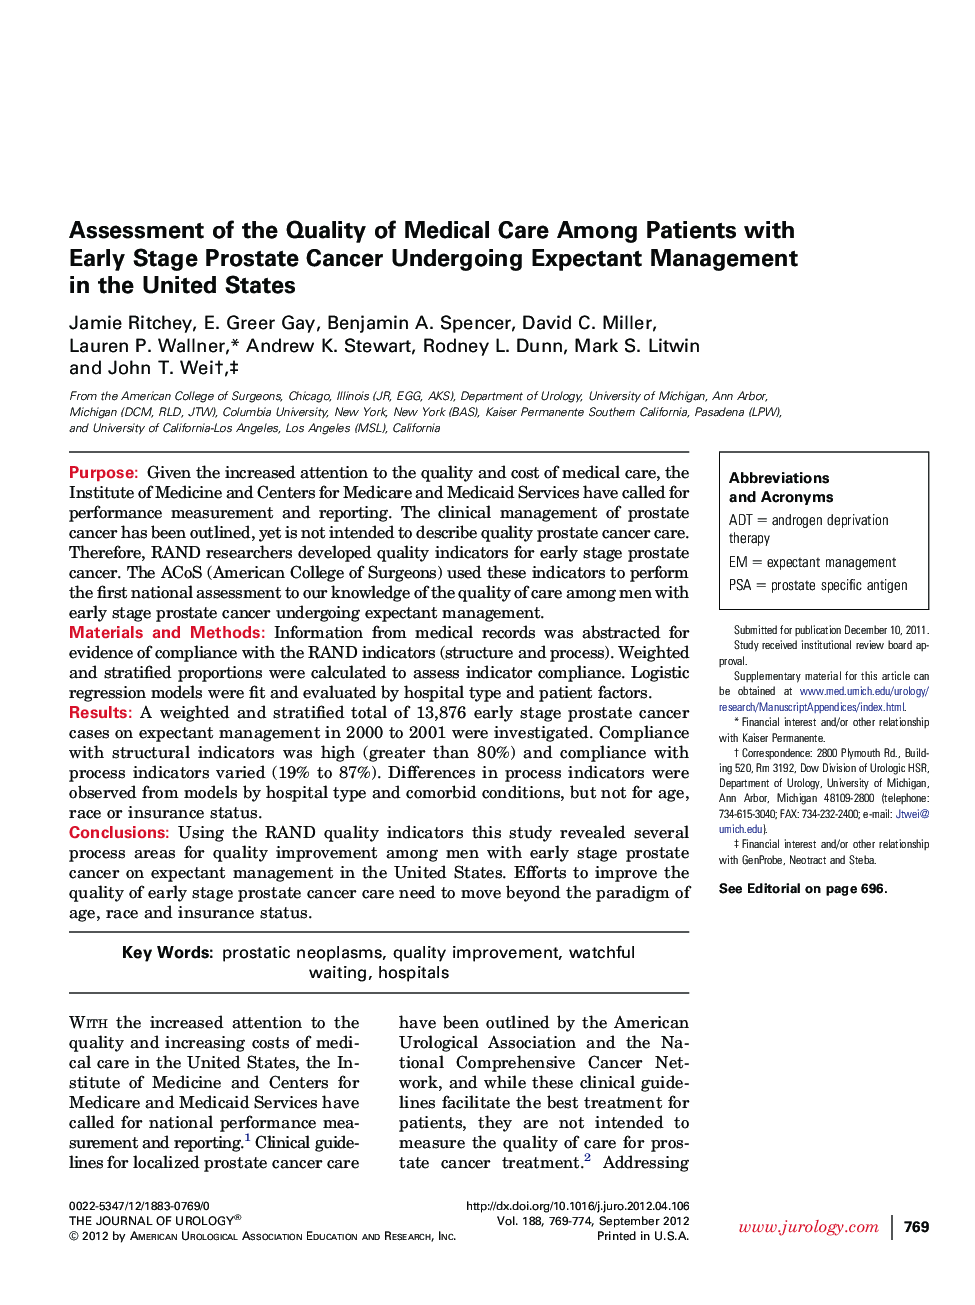 Assessment of the Quality of Medical Care Among Patients with Early Stage Prostate Cancer Undergoing Expectant Management in the United States 